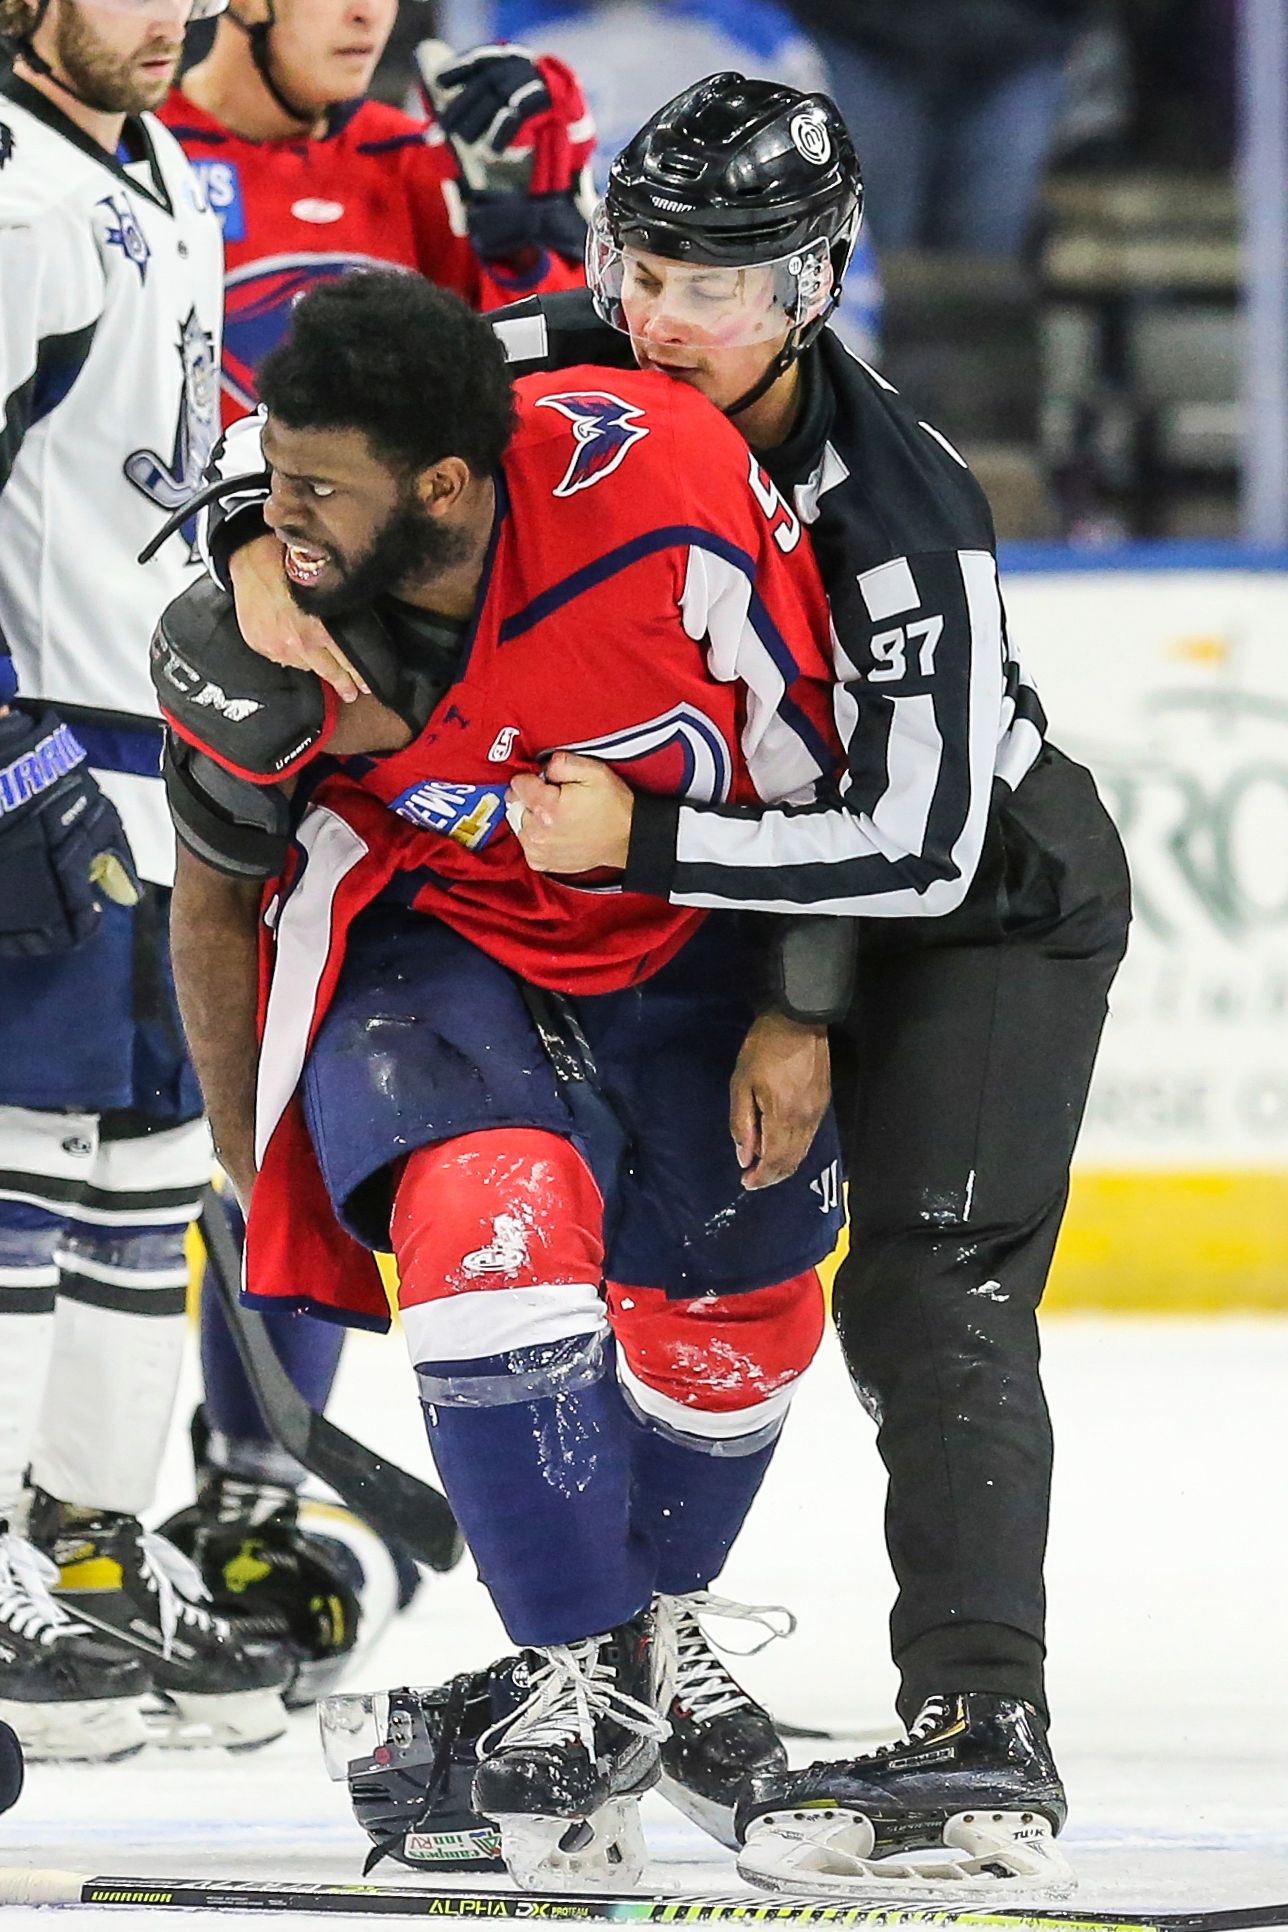 ECHL punishes Panetta after he is accused of racial gesture The Seattle Times